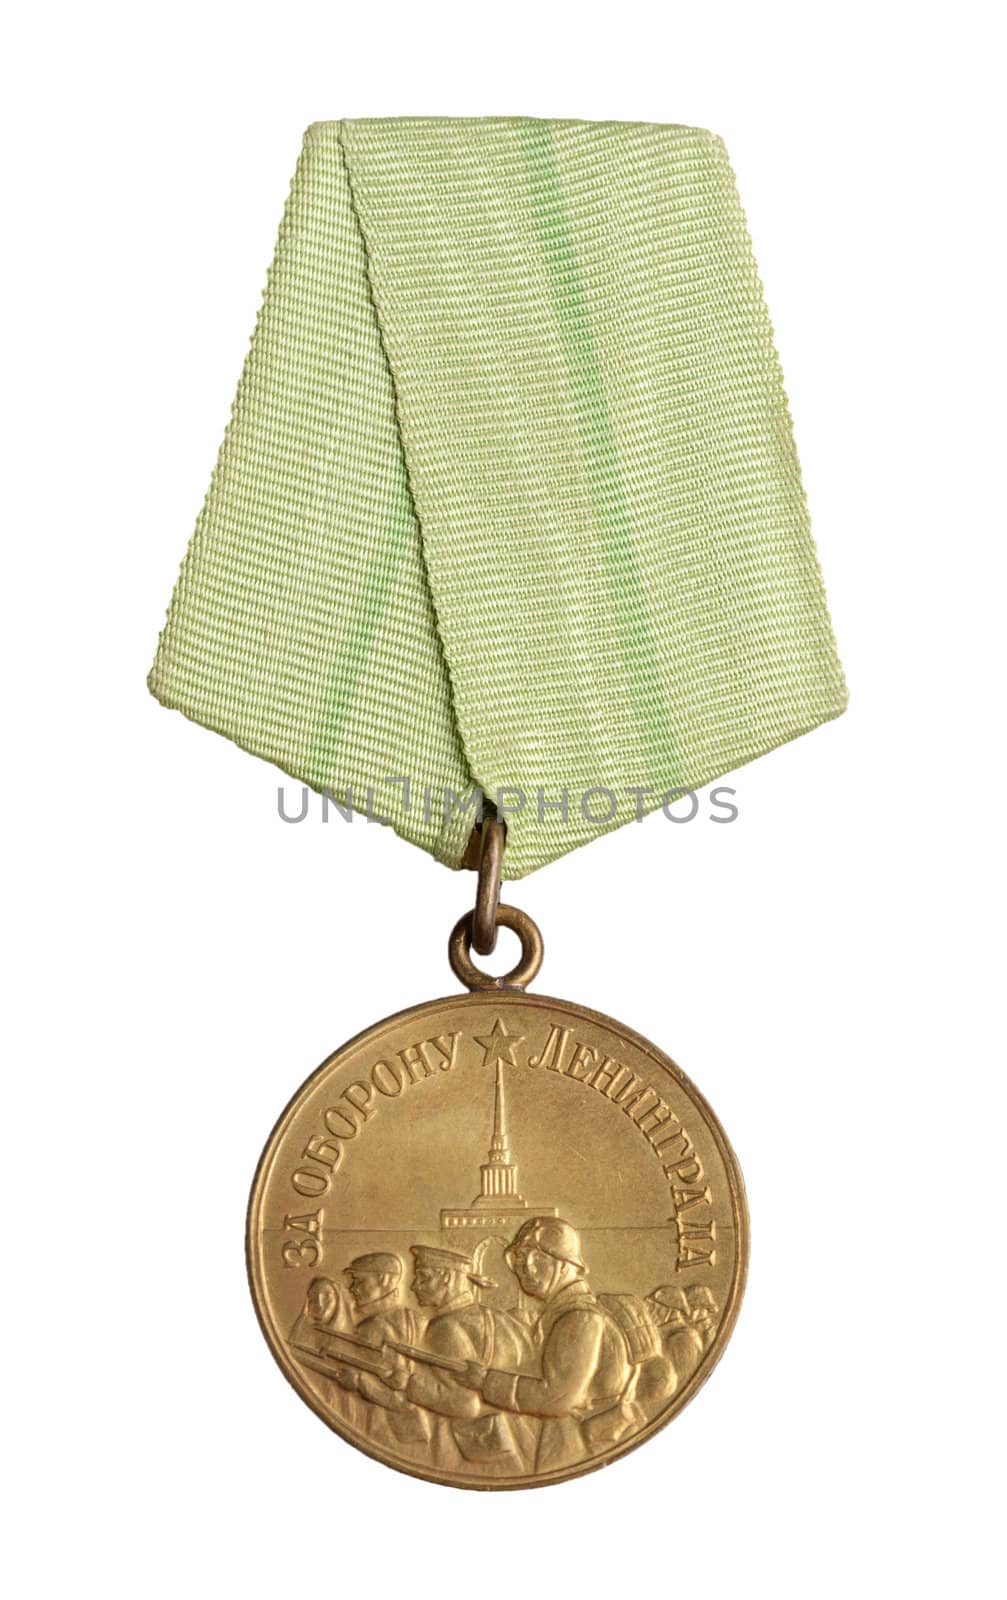 Russian medal close up by Roka